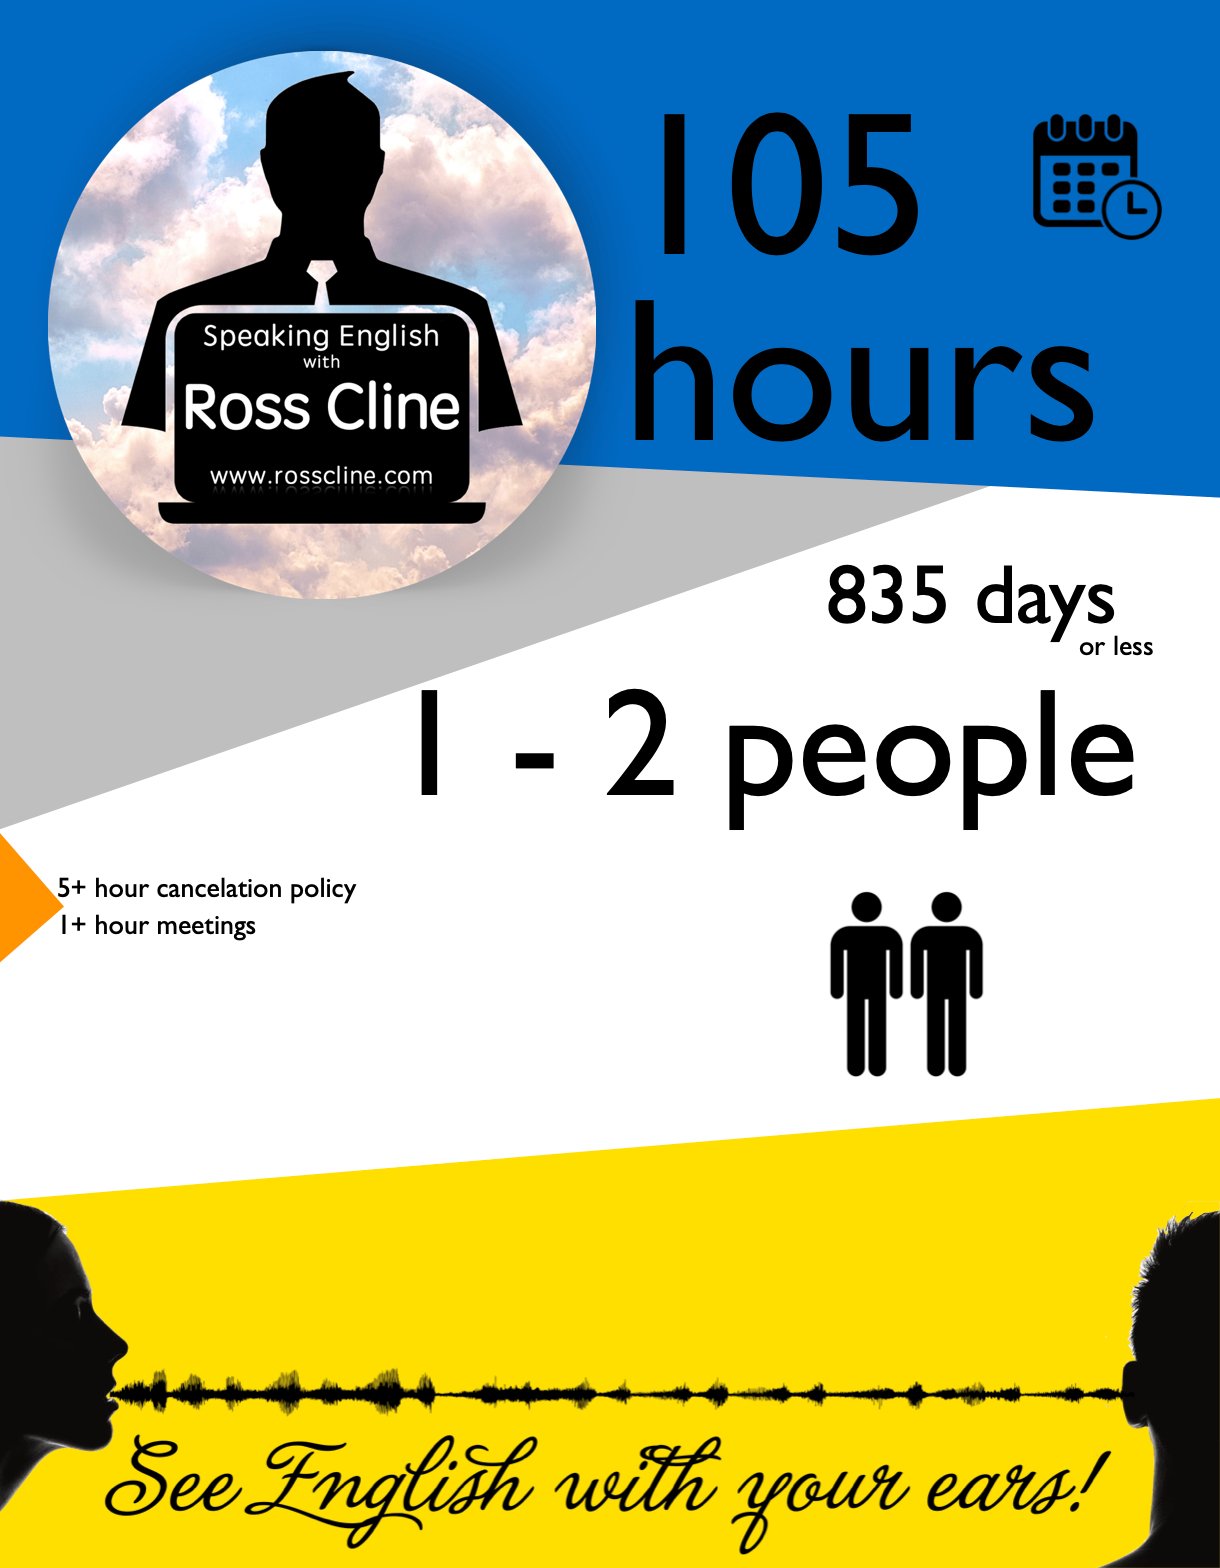 C.) 105 hours of Online Time for 1 - 2 people - www.rosscline.com